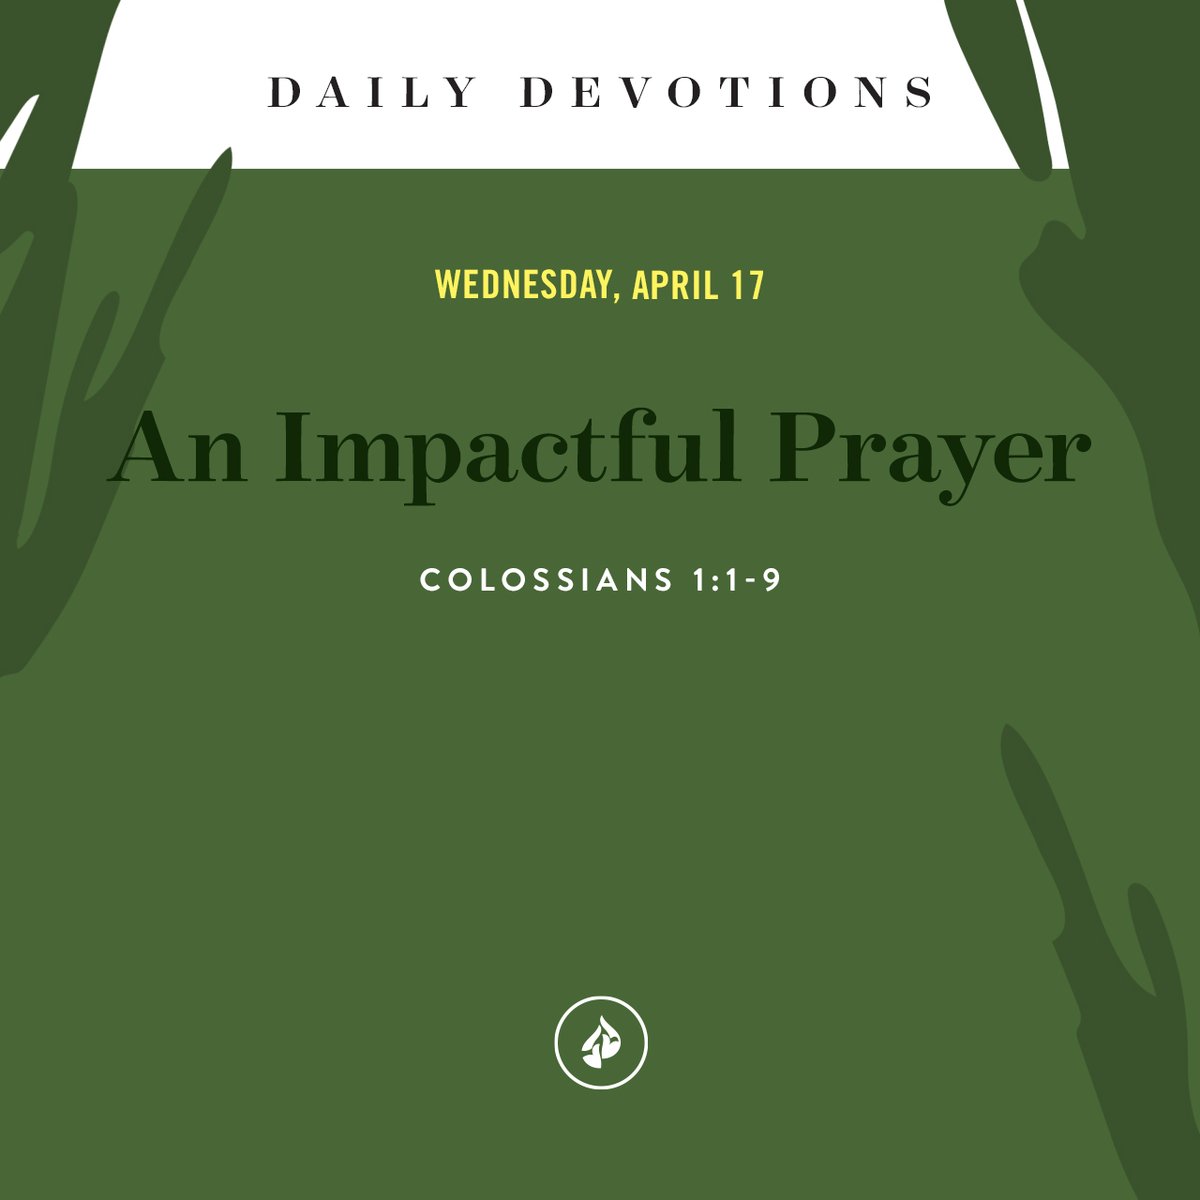 We know our requests align with God's will when they come directly from Scripture. #Devotional 
intouch.org/read/daily-dev…